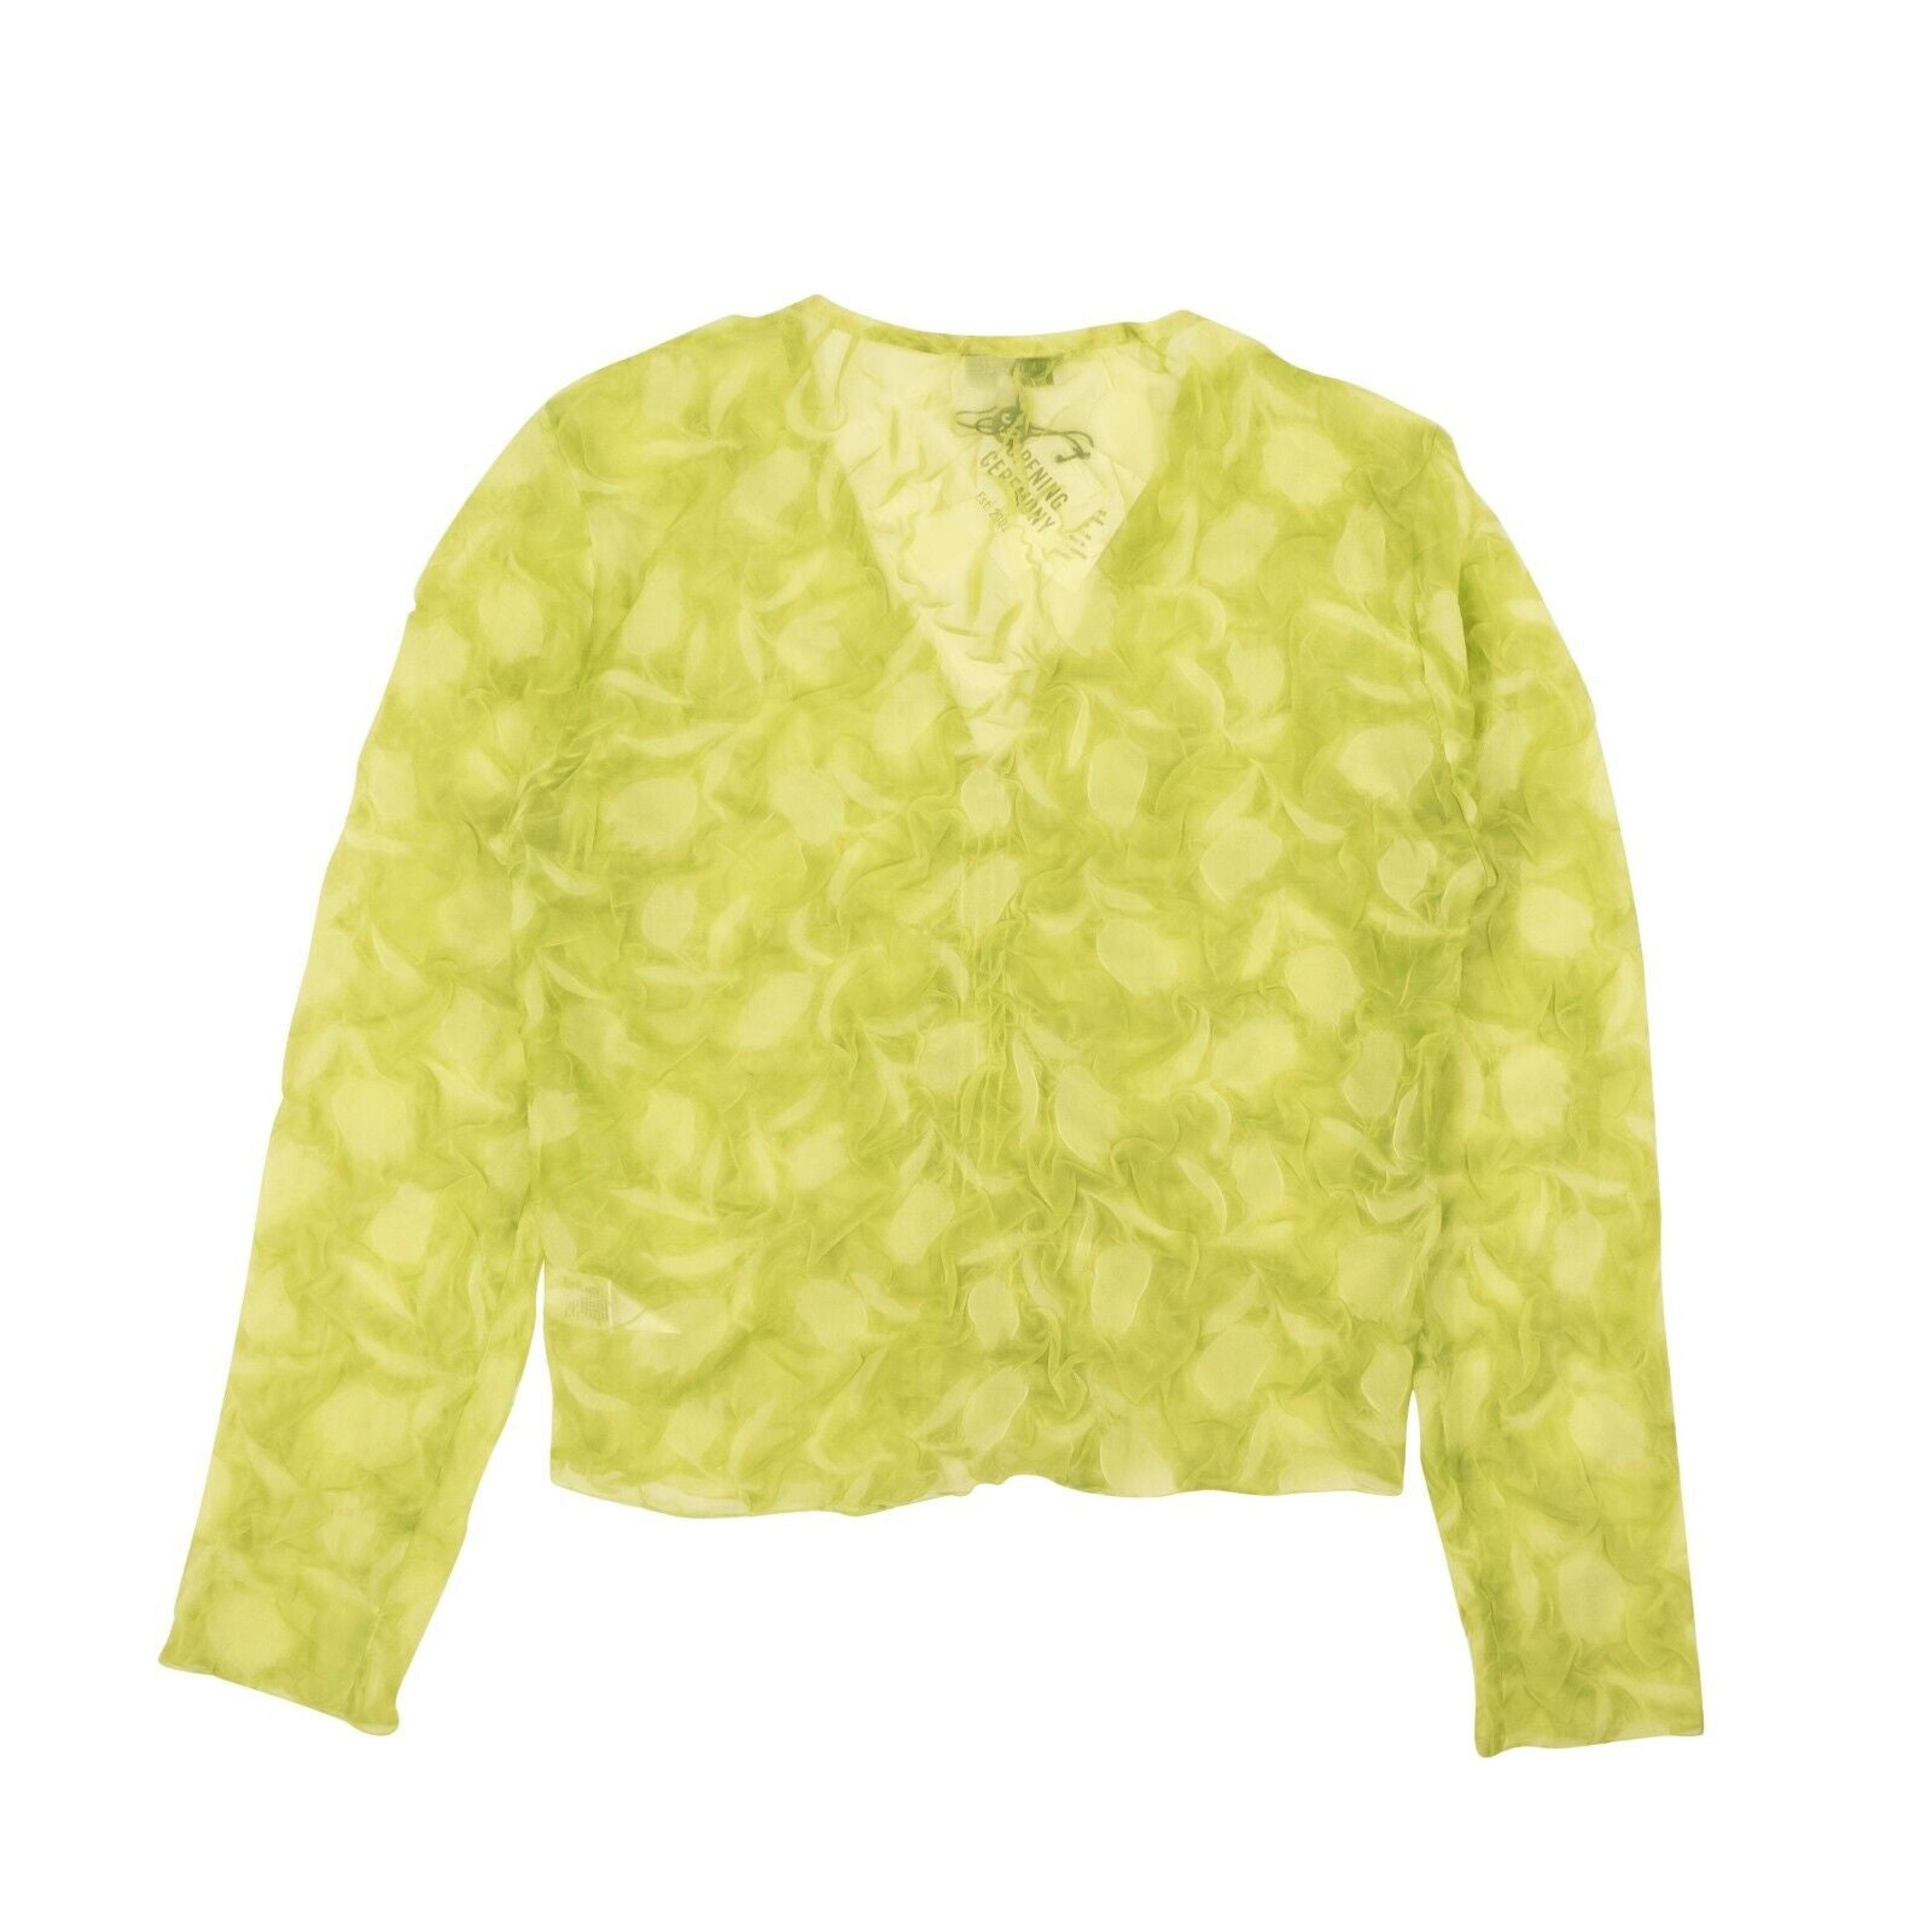 Alternate View 2 of Opening Ceremony Ls Crinkle Top - Yellow